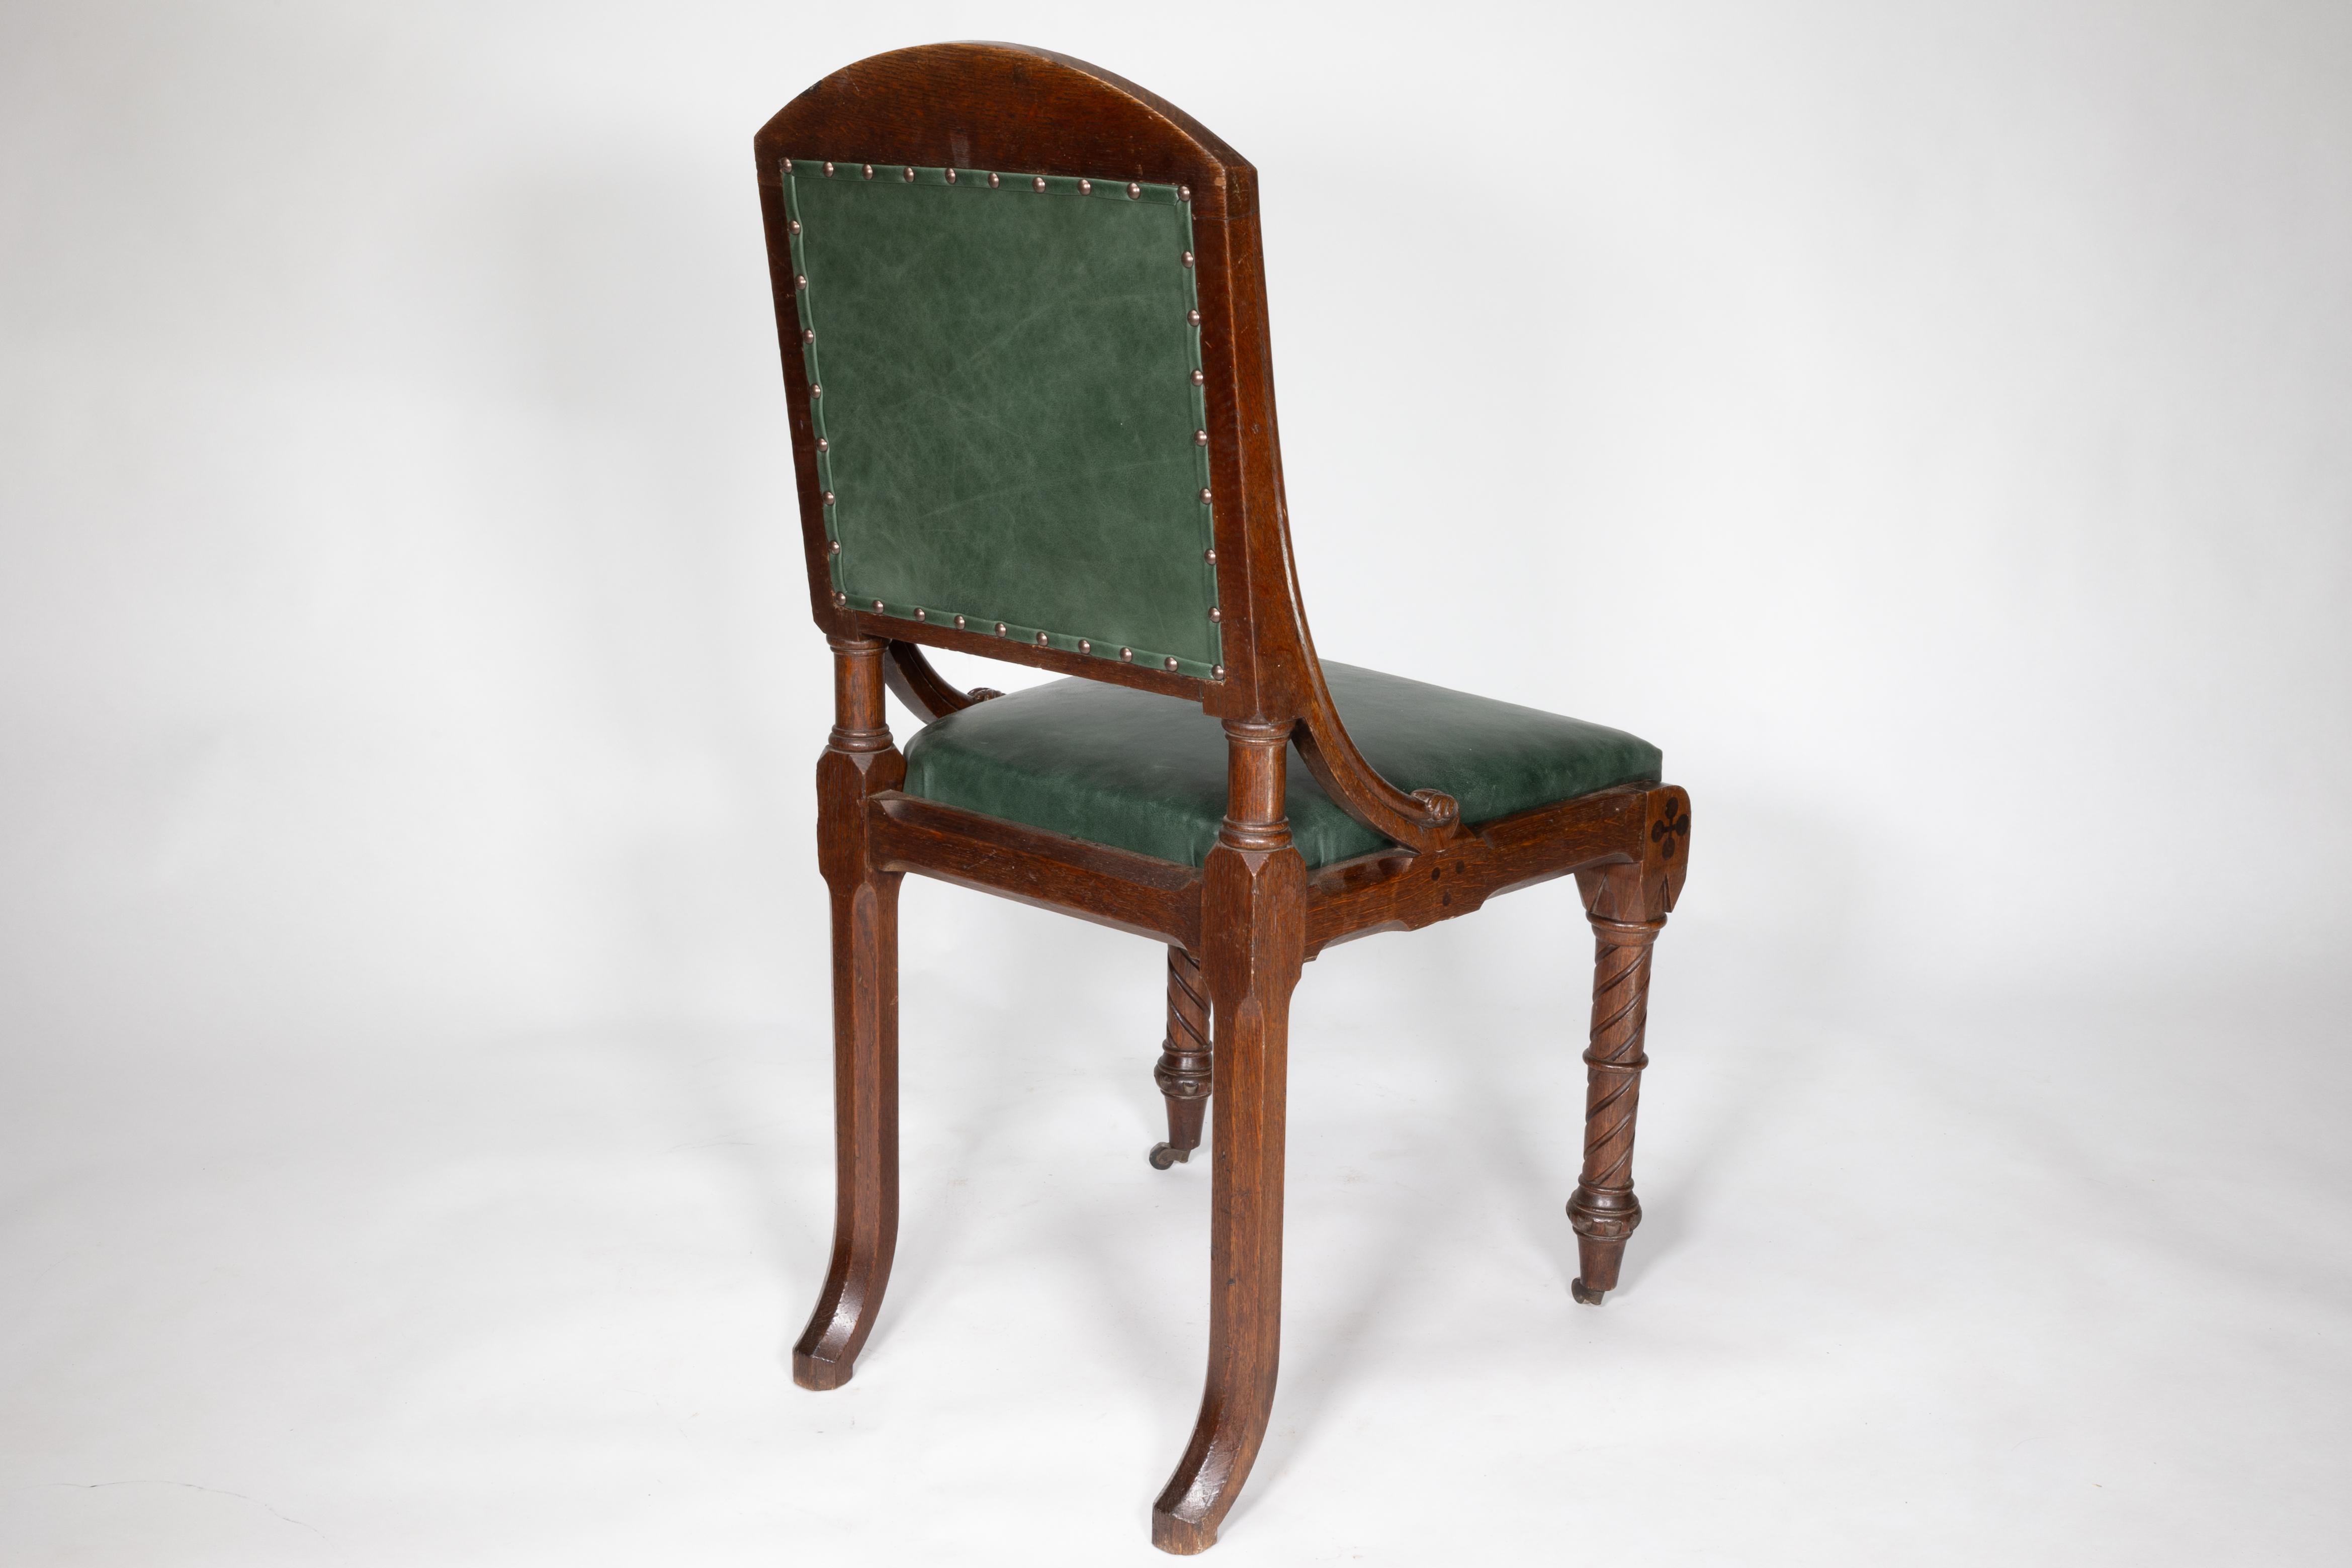 John Pollard Seddon (attributed). A Gothic Revival Oak Side or Desk Chair In Good Condition For Sale In London, GB